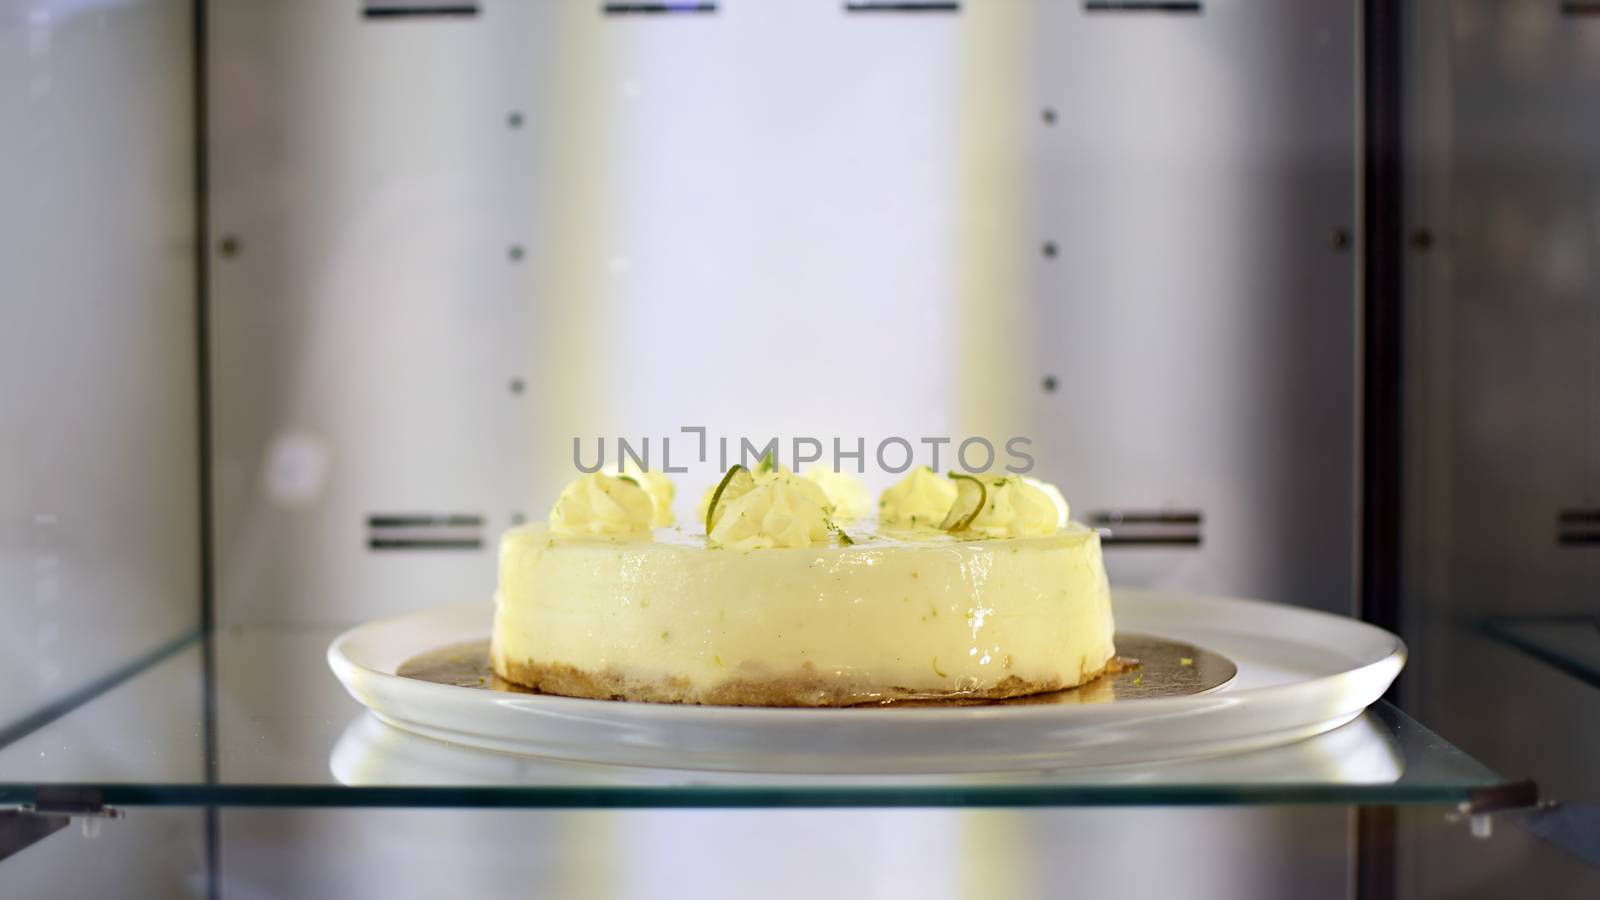 Delicious cheese-cake with whipped cream at bakery display.